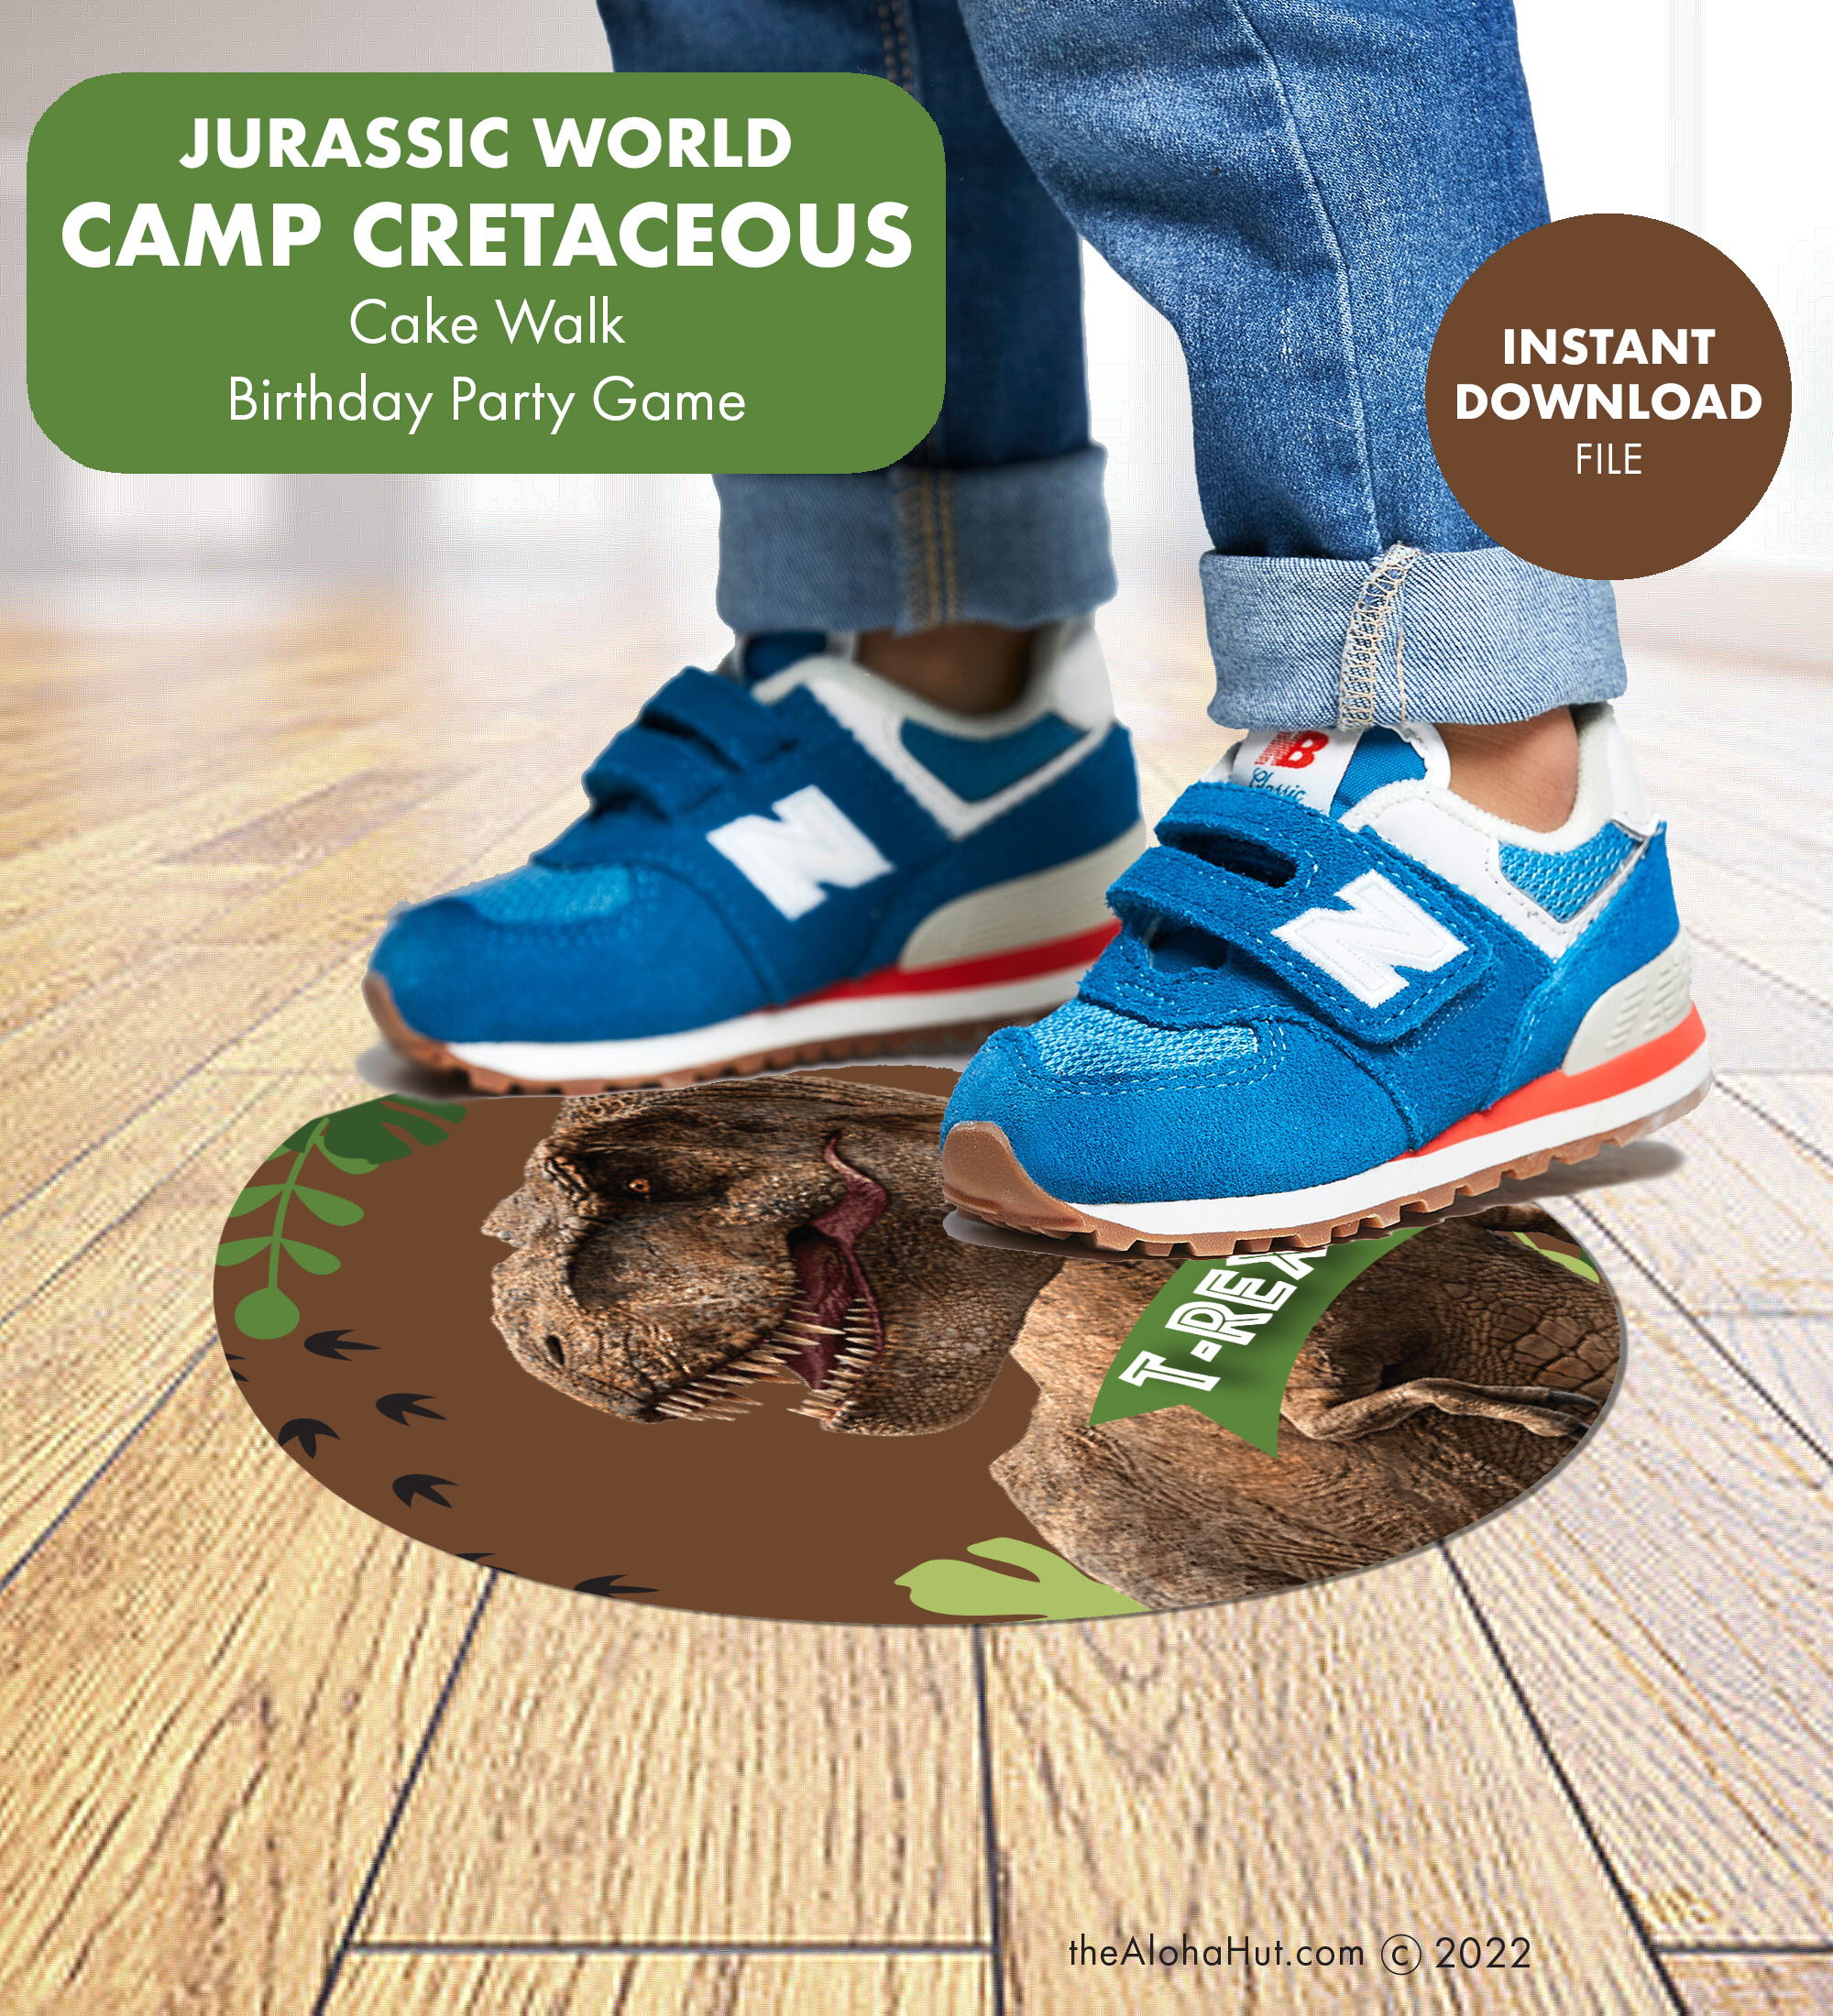 Jurassic World Camp Cretaceous Cake Walk Party Game